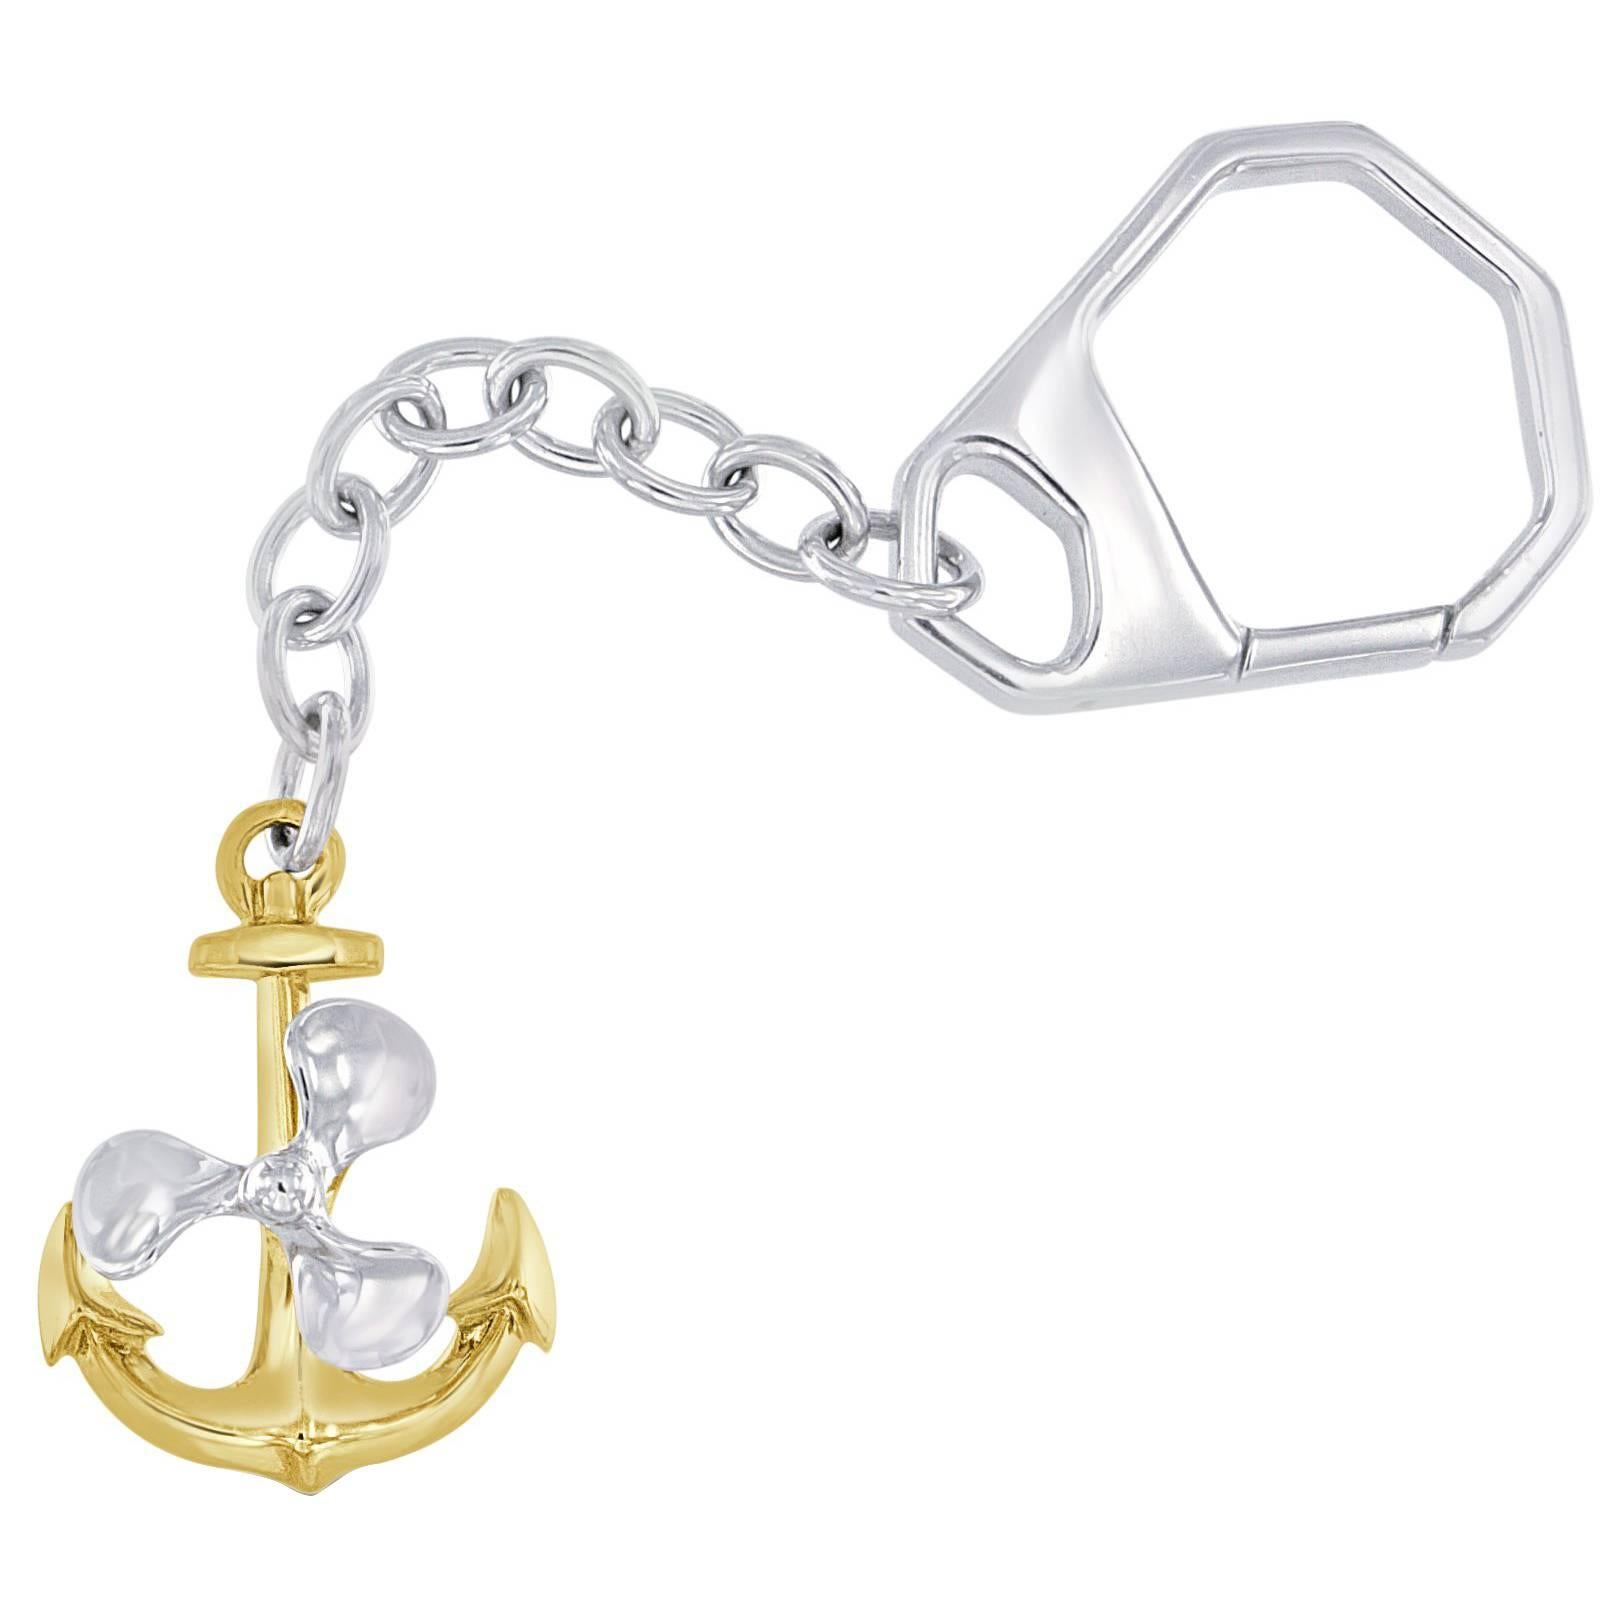 Gold Anchor and Propeller Key Chain For Sale